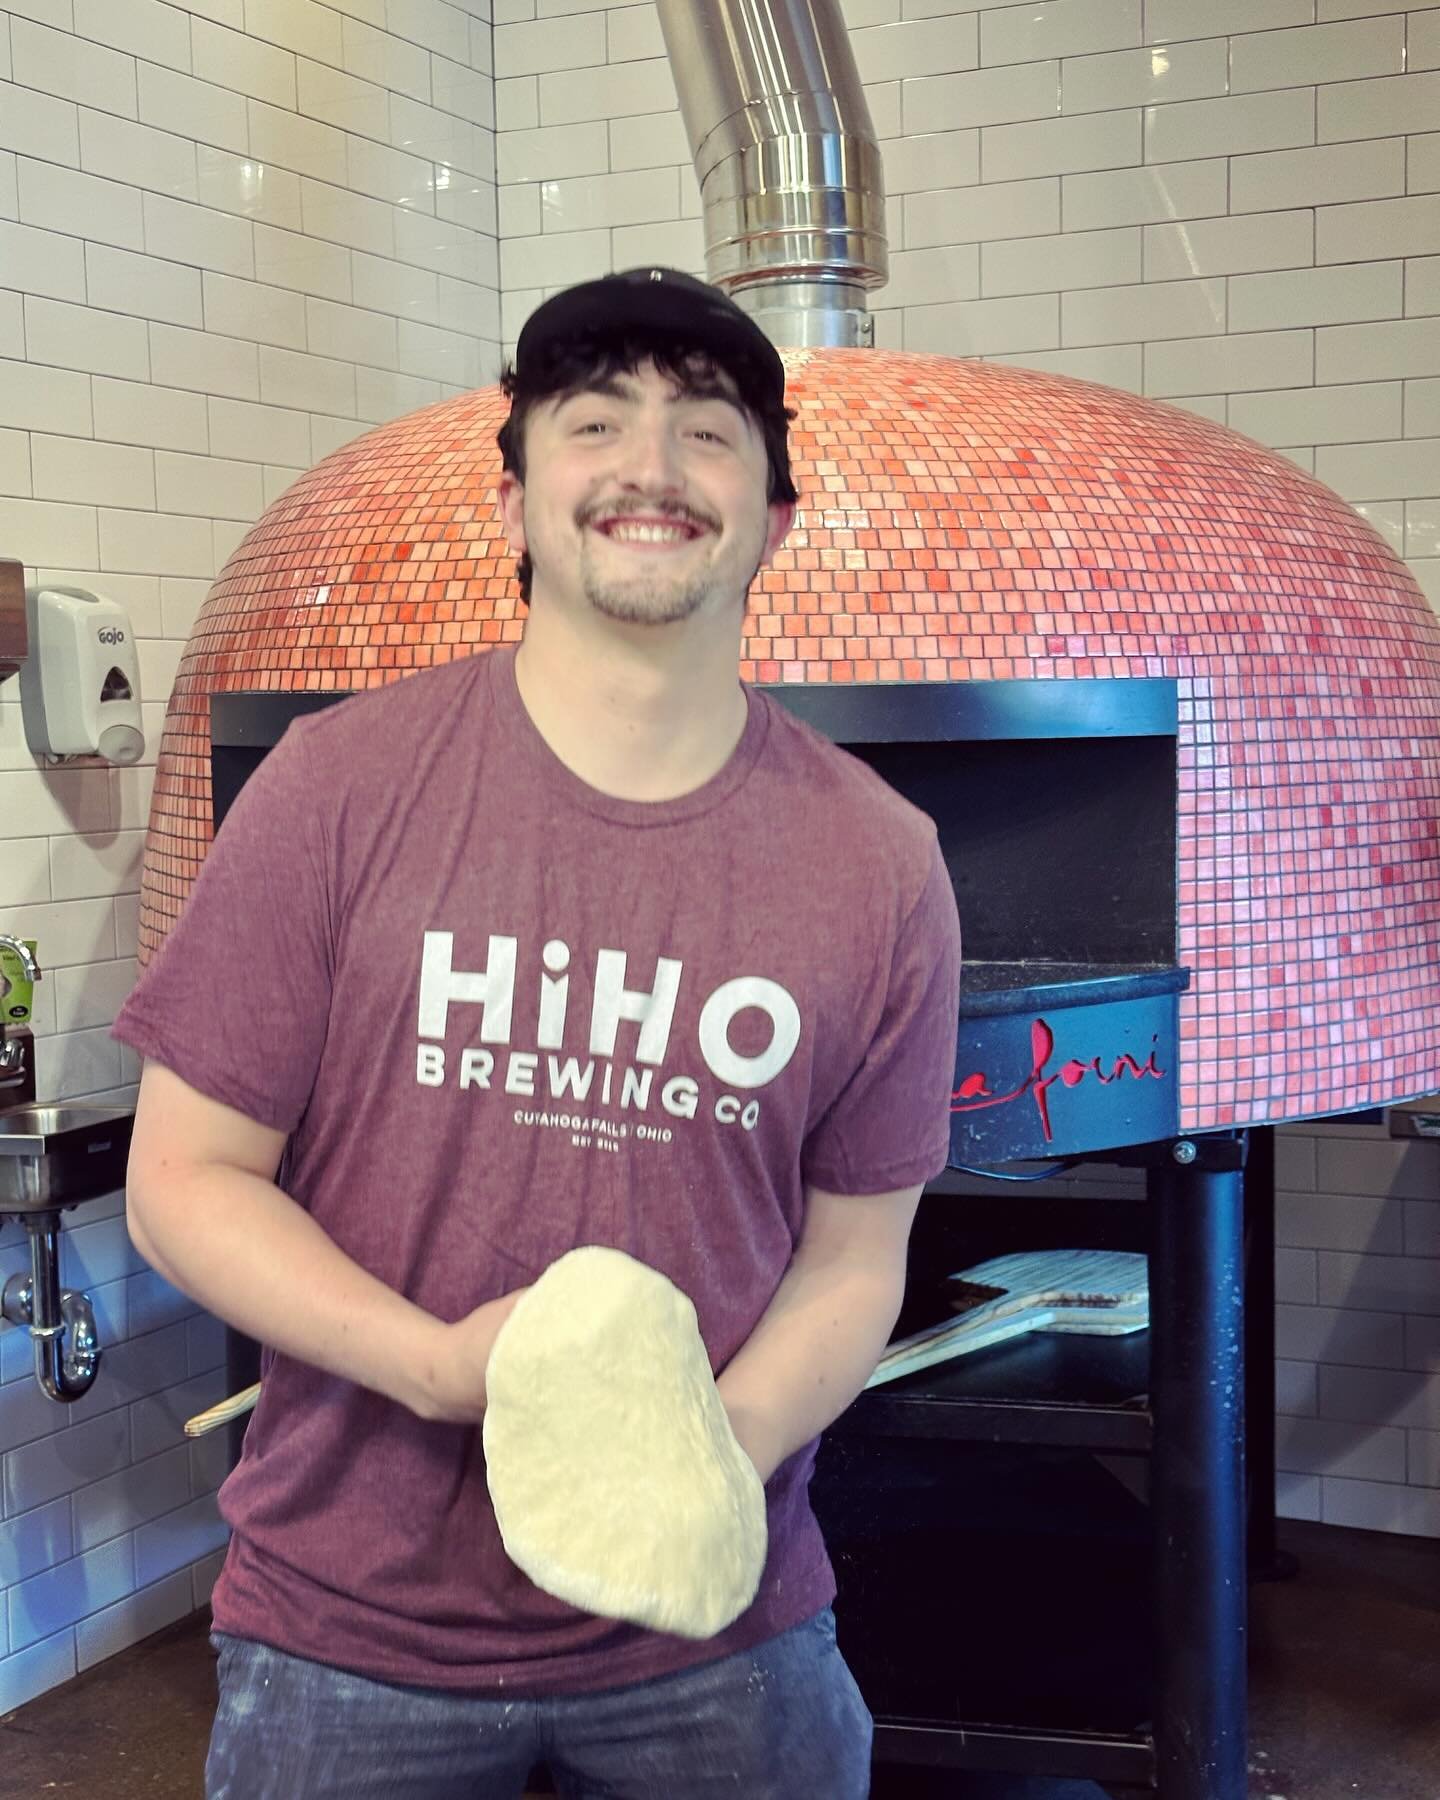 This is ALEX! He has worked with us for over a year and has never been on @instagram ?! Next week is his last week at HiHO before he moves to Columbus with his girlfriend Anna! Good luck Alex! We will miss you 🥰